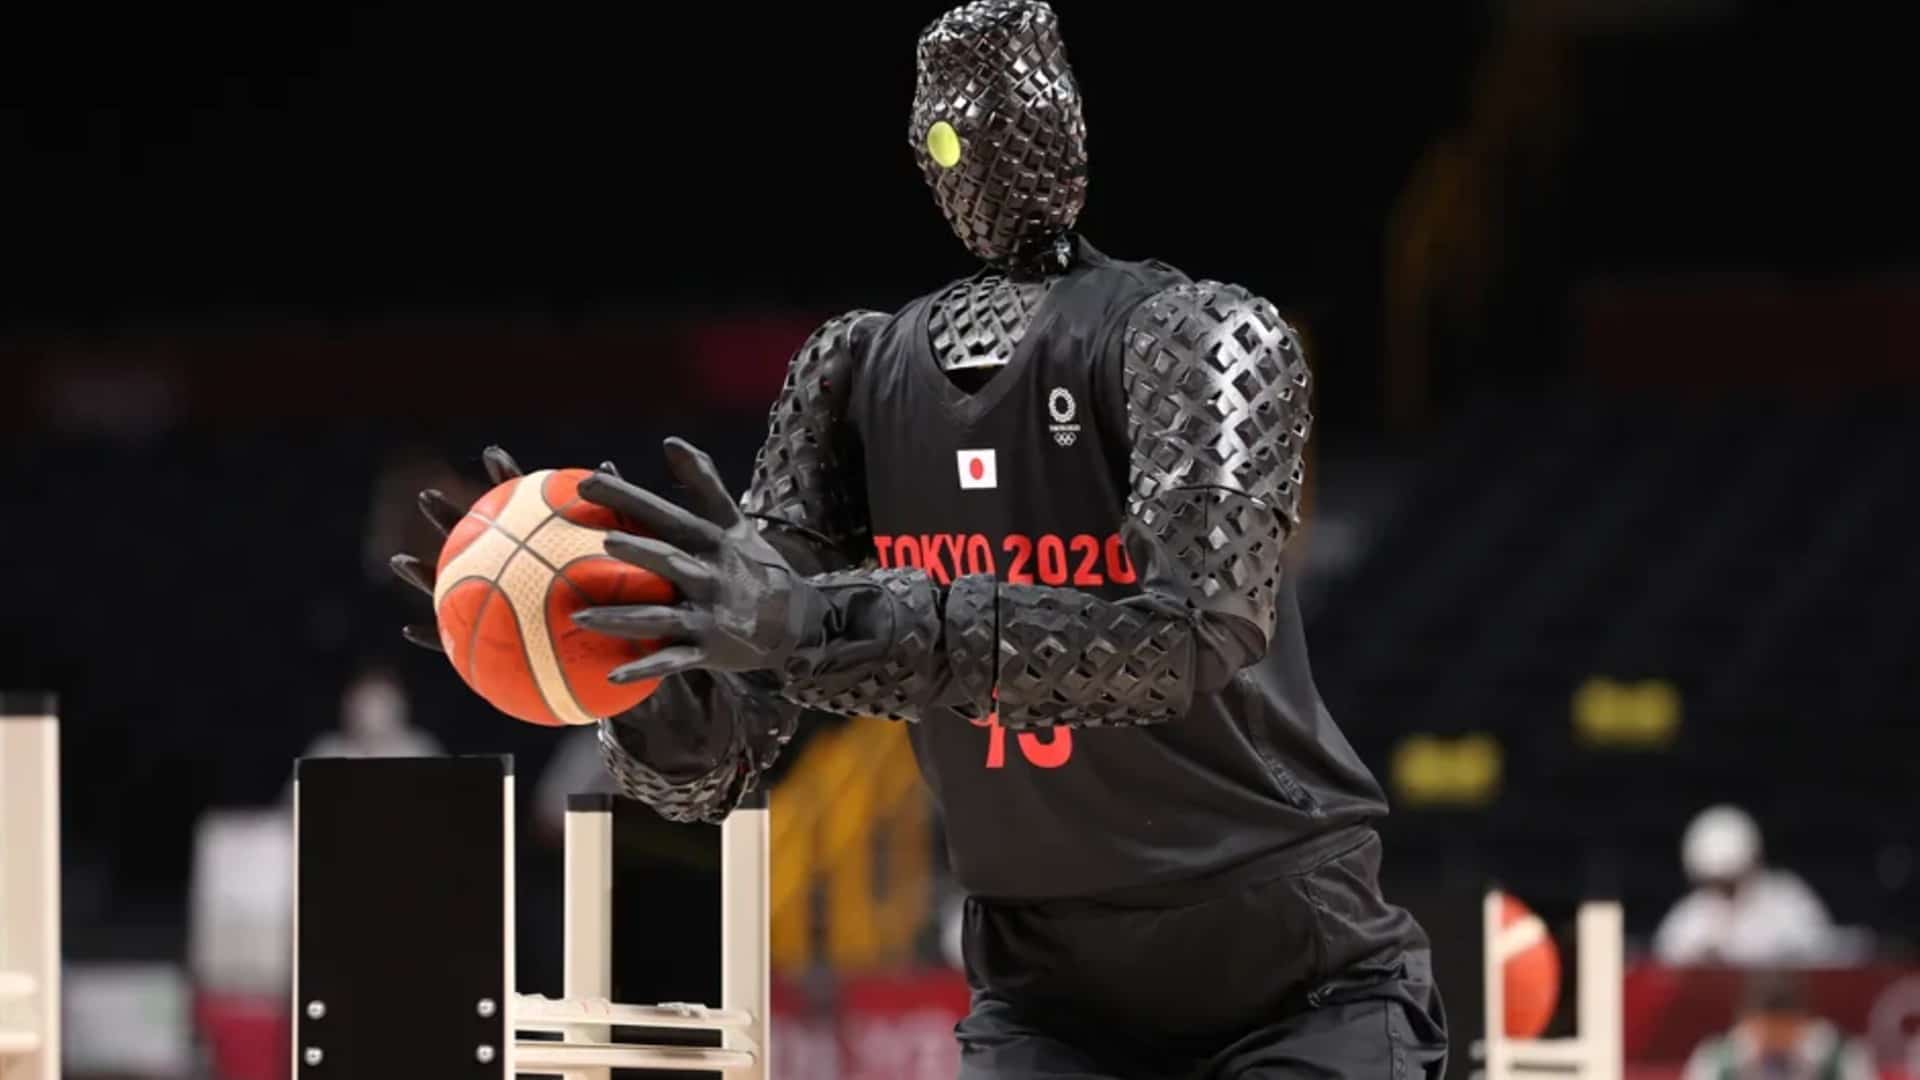 What’s Next For Sports? Tokyo Olympics Robot Sinks Basketballs